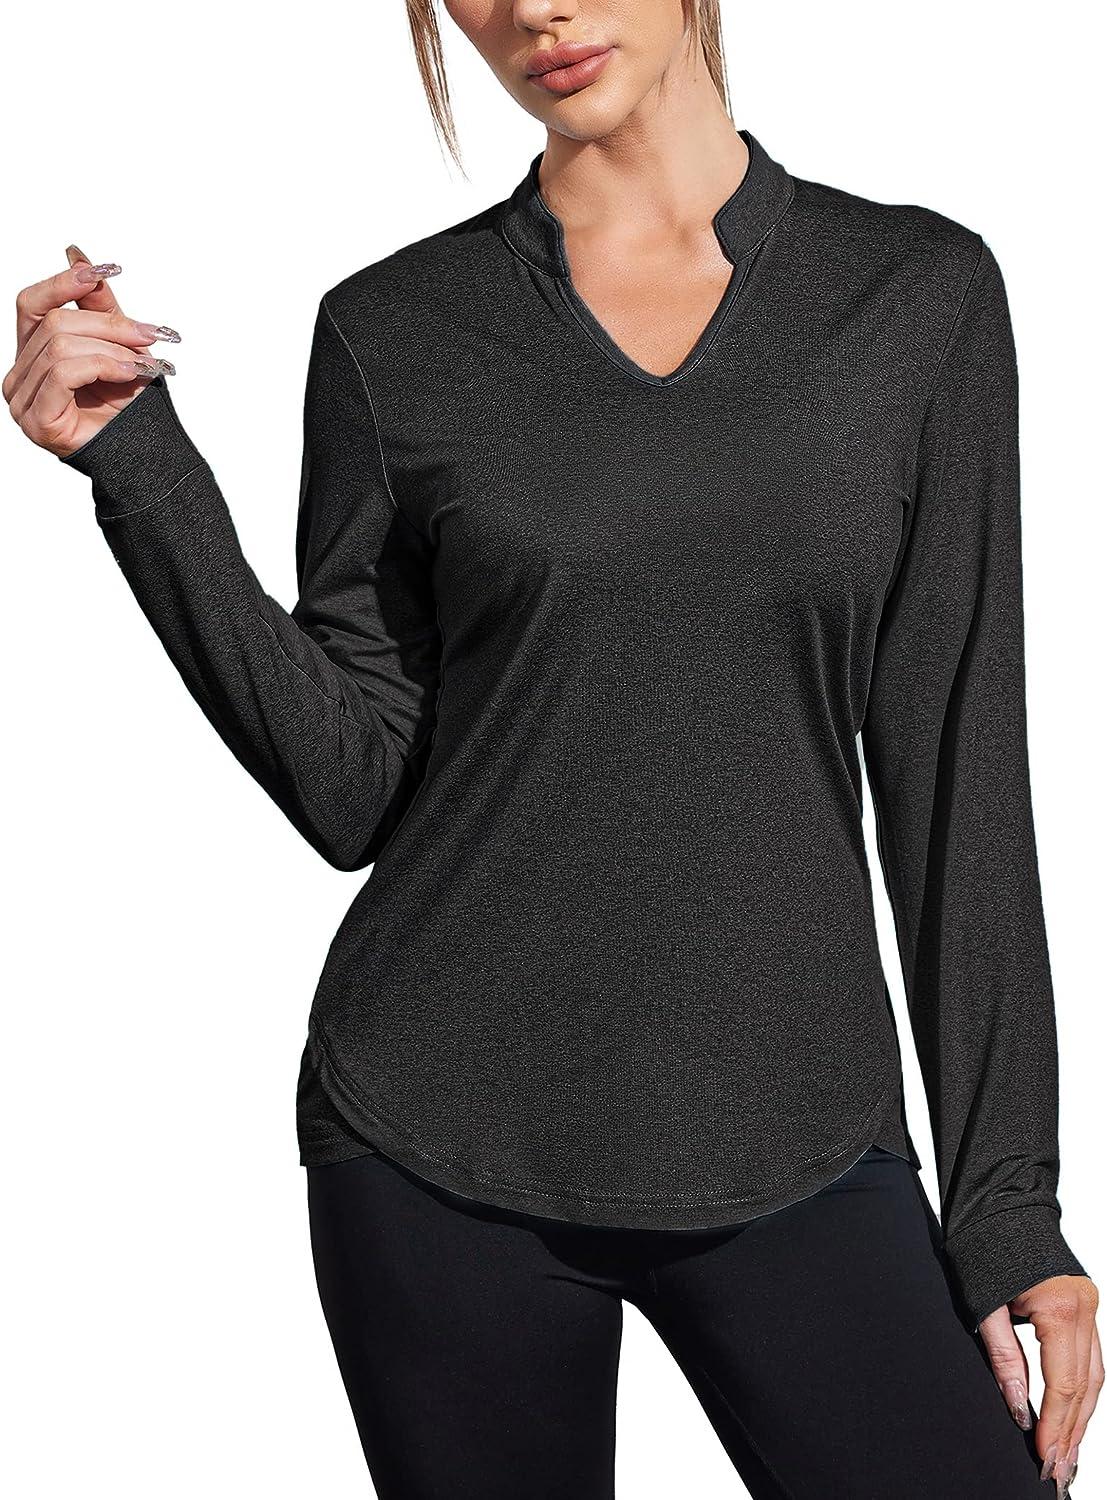 COOrun Workout Shirts for Women Long Sleeve Yoga Tops Casual Hiking Tee  Shirt Athletic Breathable Top Quick Dry 1-black Large